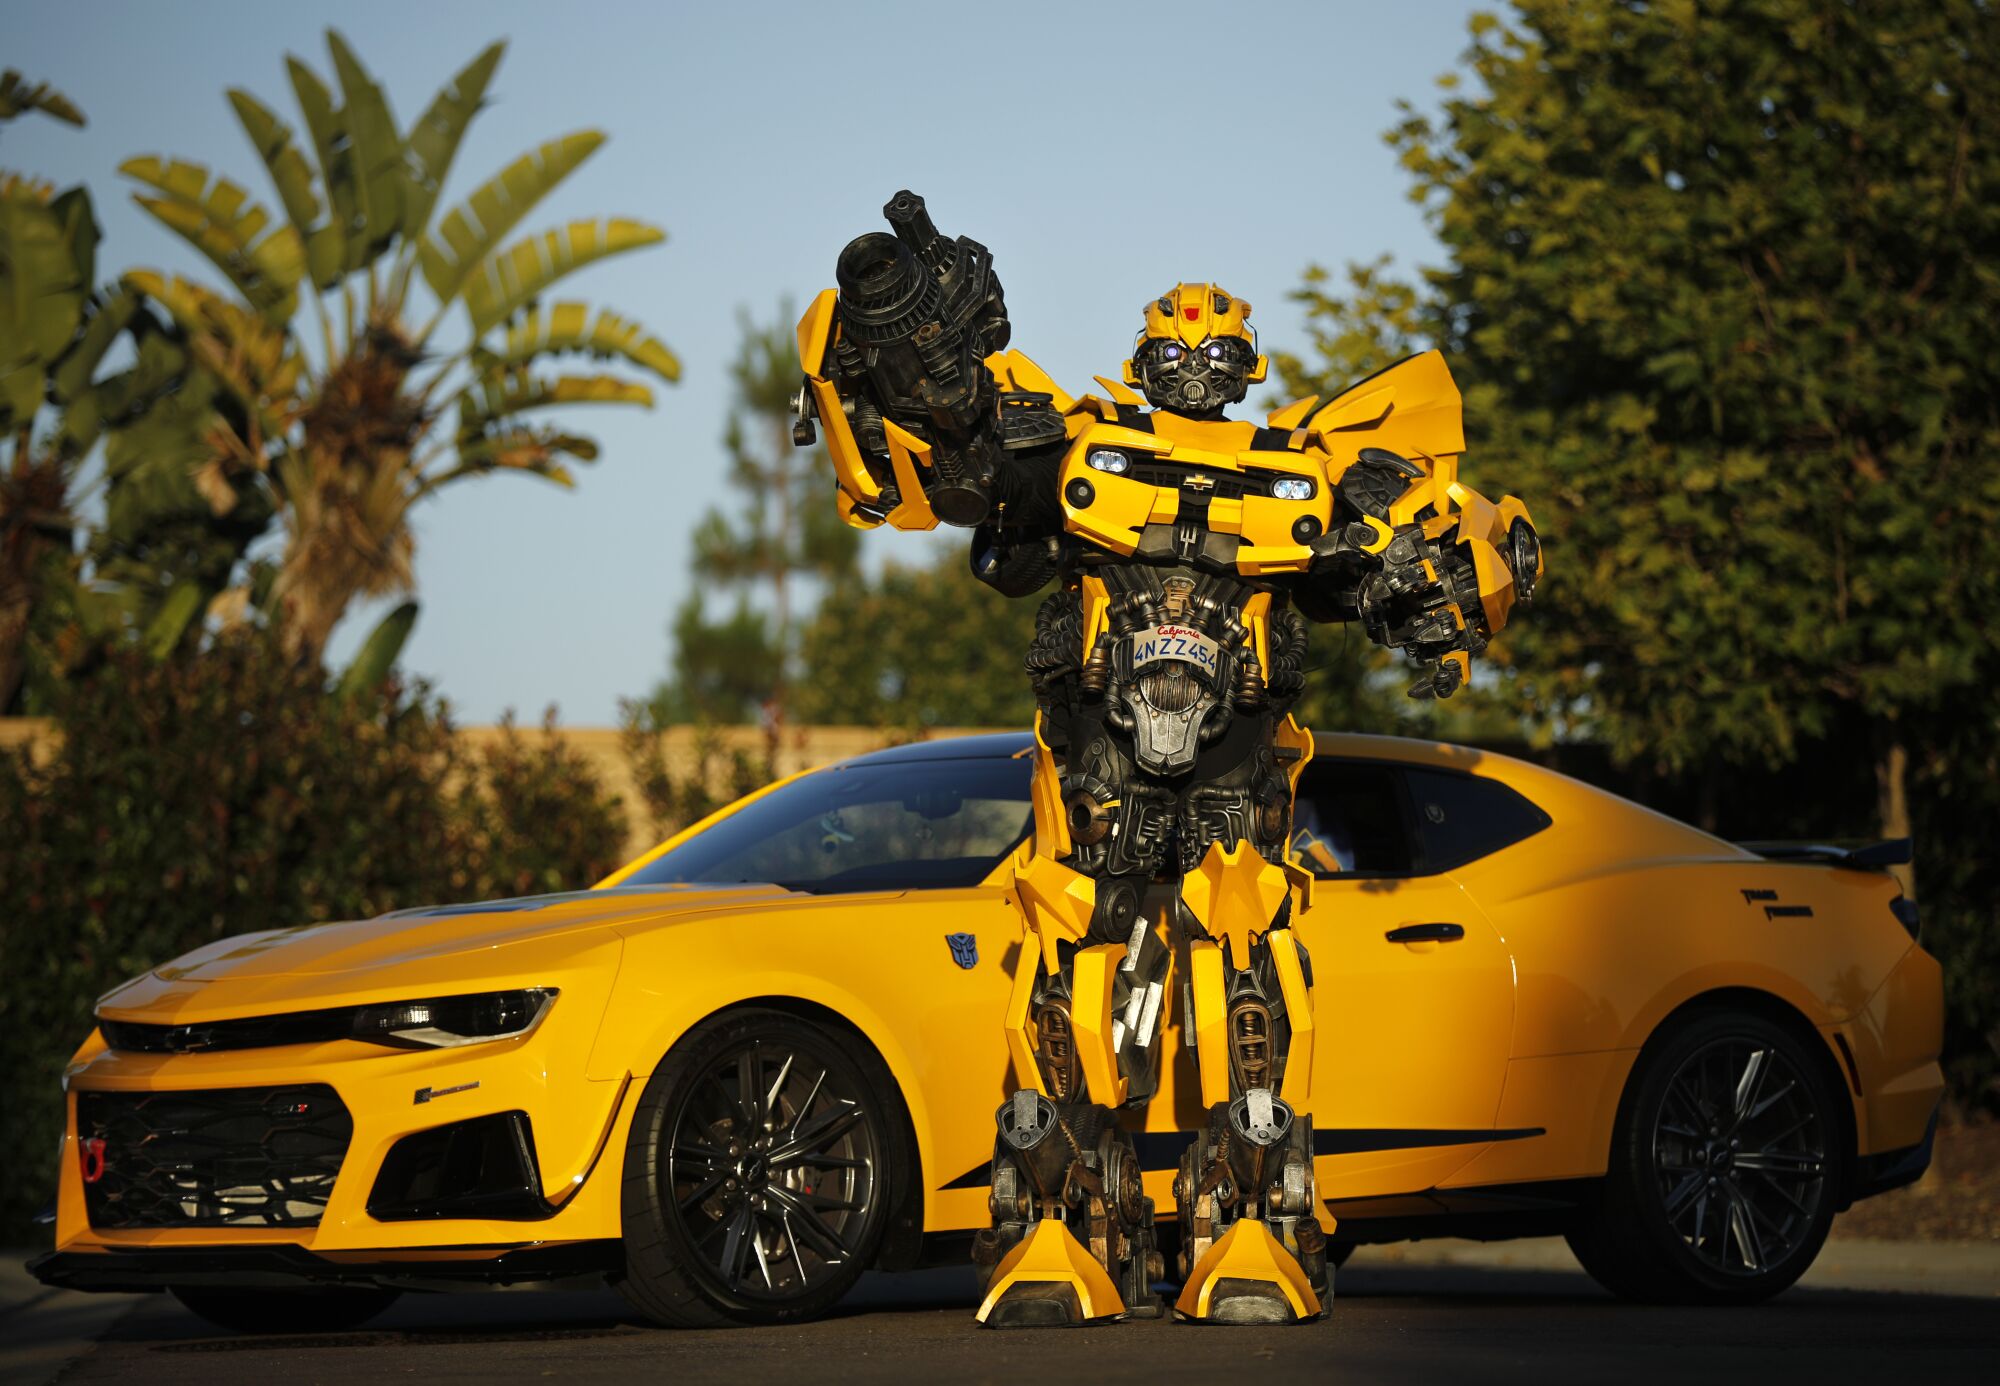 Justin Wu wears his B-127 costume, also known as Bumblebee from the "Transformer" series